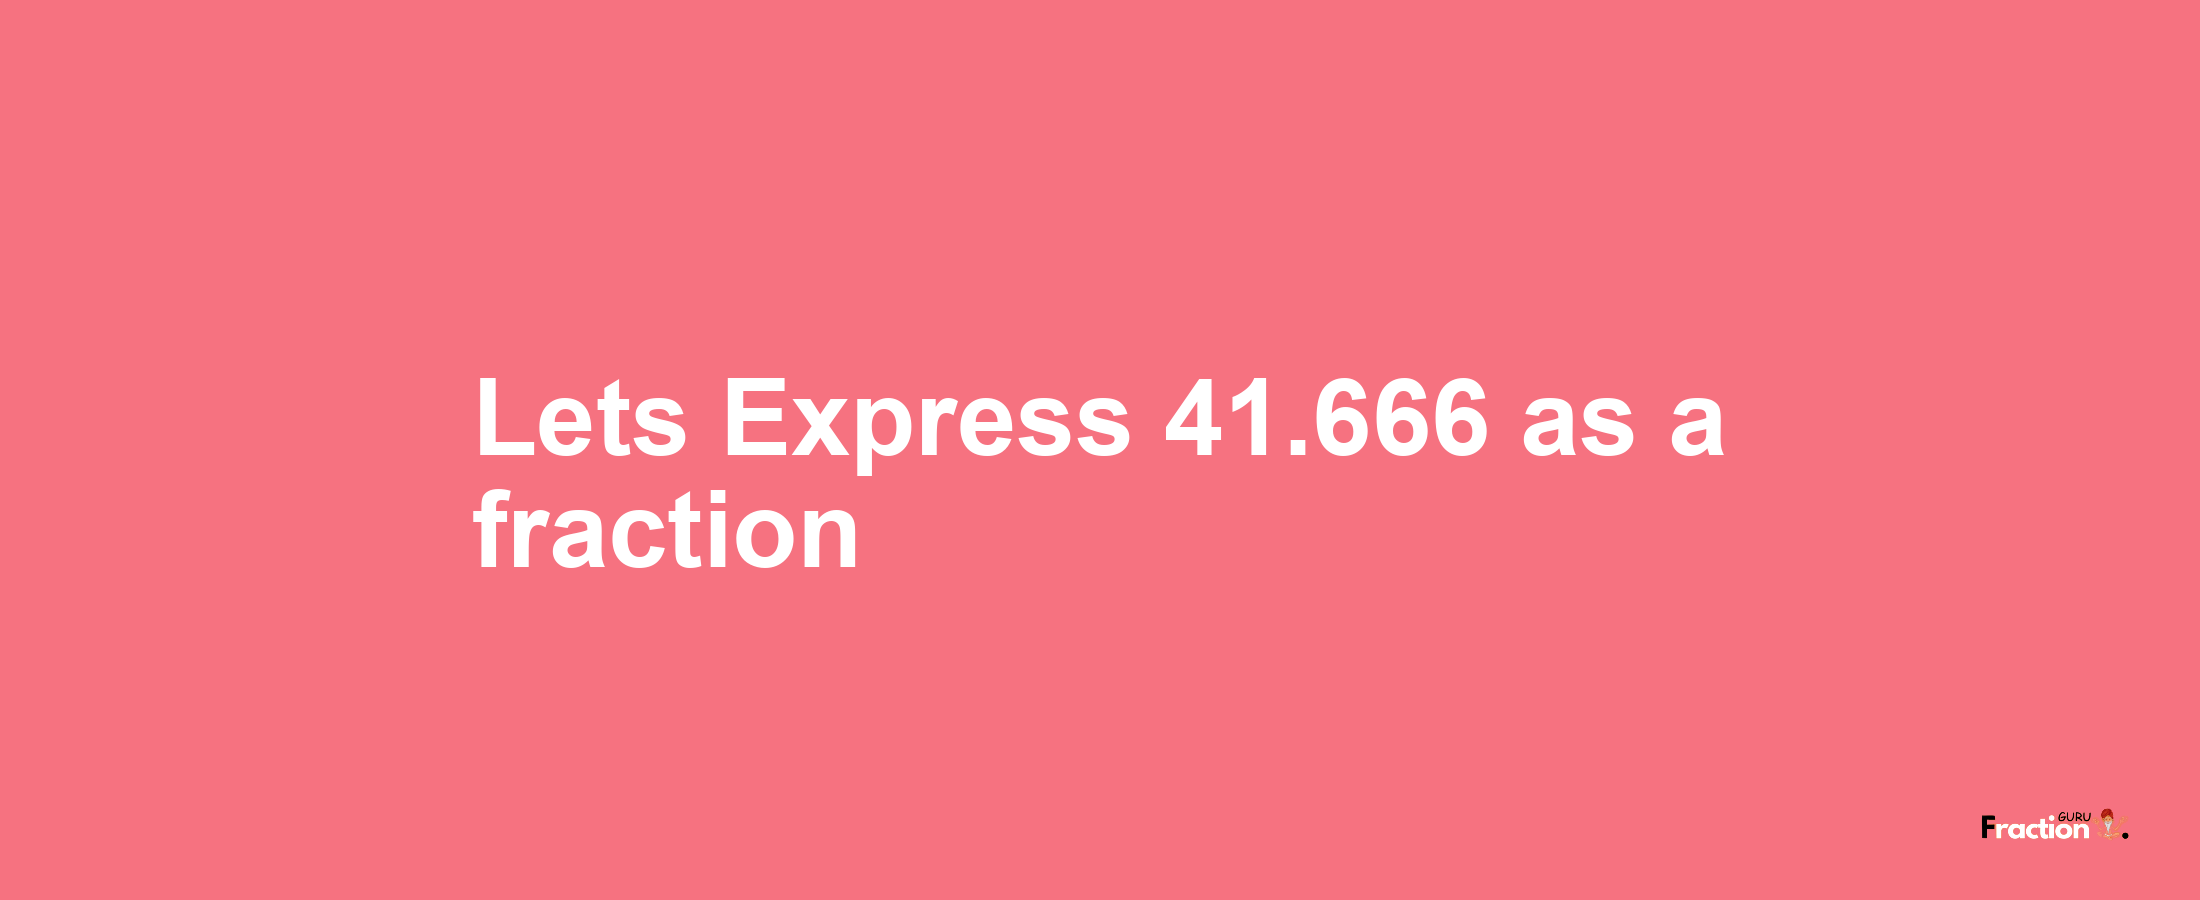 Lets Express 41.666 as afraction